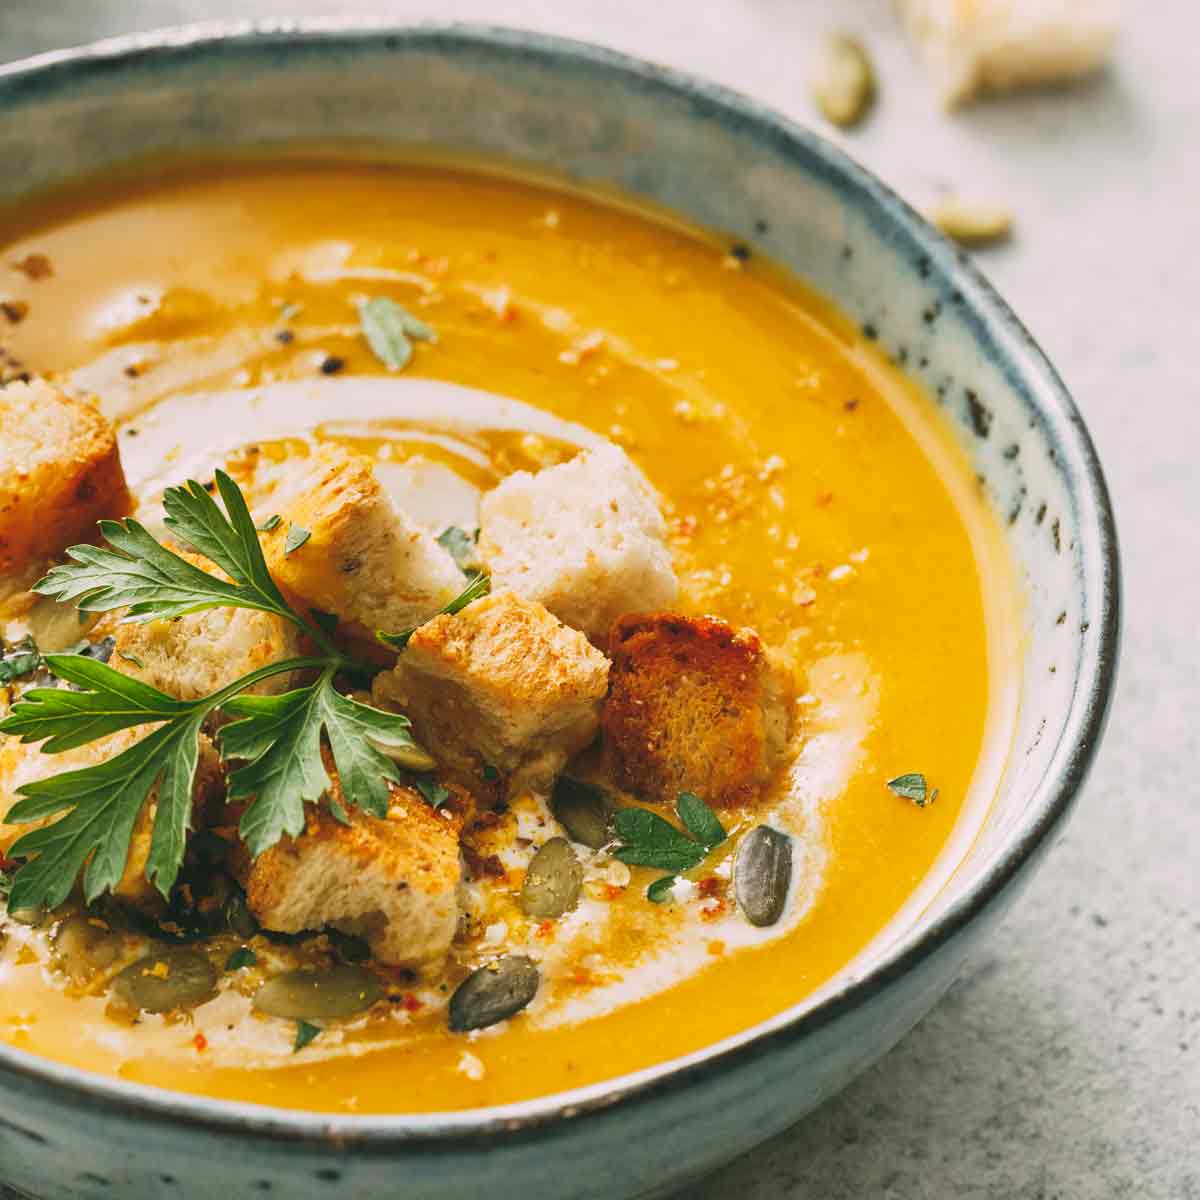 Bowl of pumpkin soup garnished with cream, croutons, parsley, and pepitas.